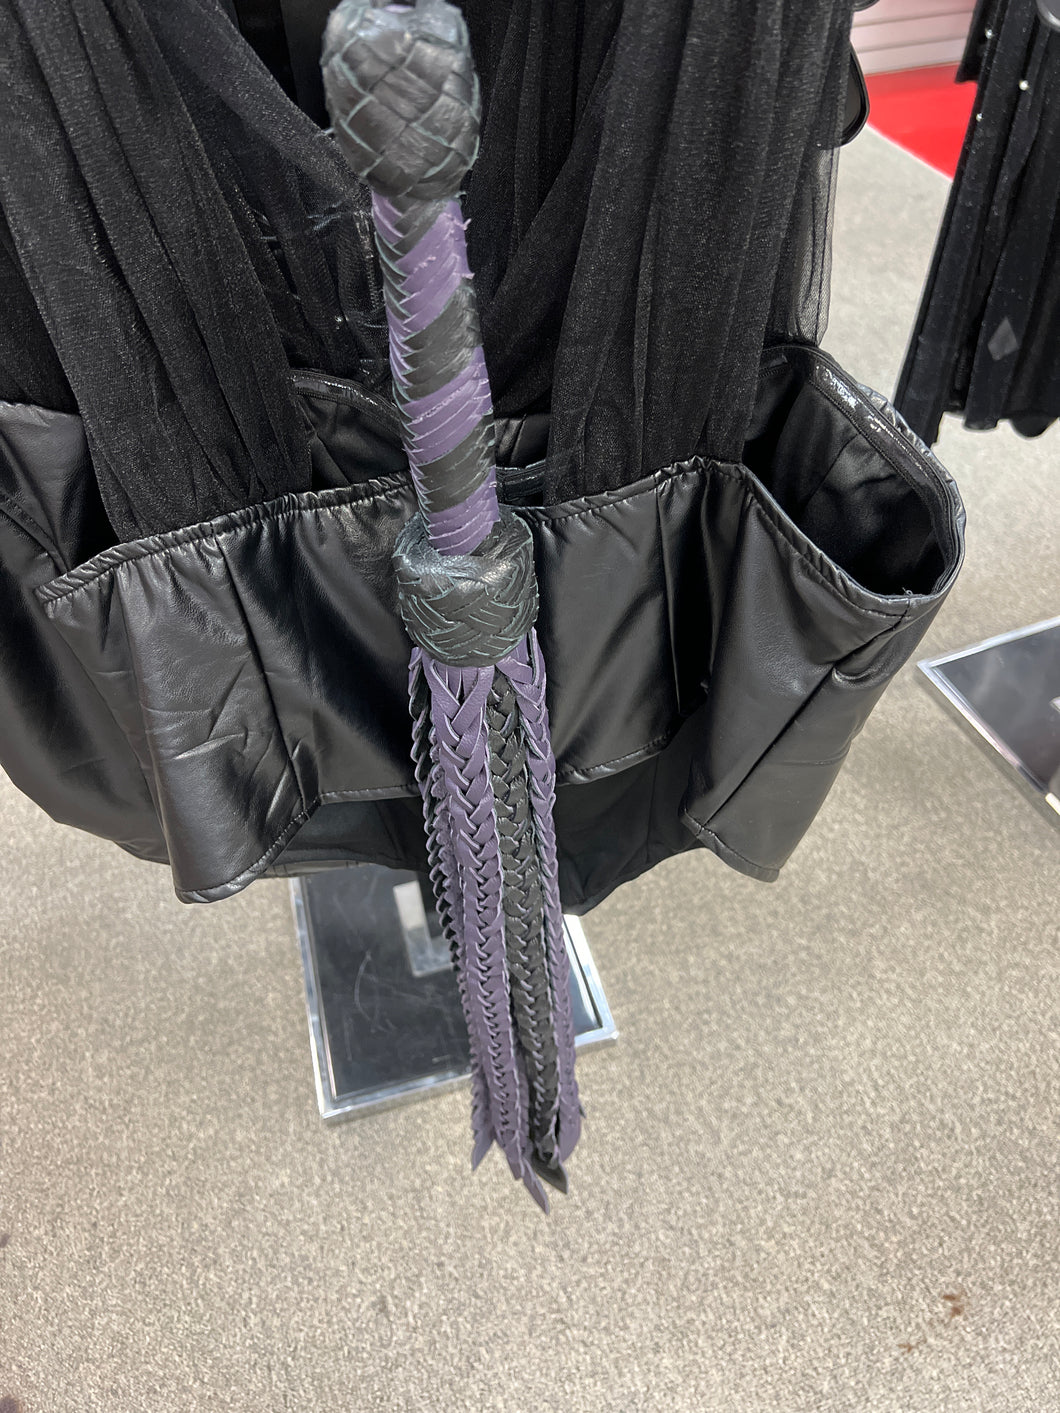 PURPLE AND BLACK FLAT BRAIDED FLOGGER BY DAN HOUCHINS